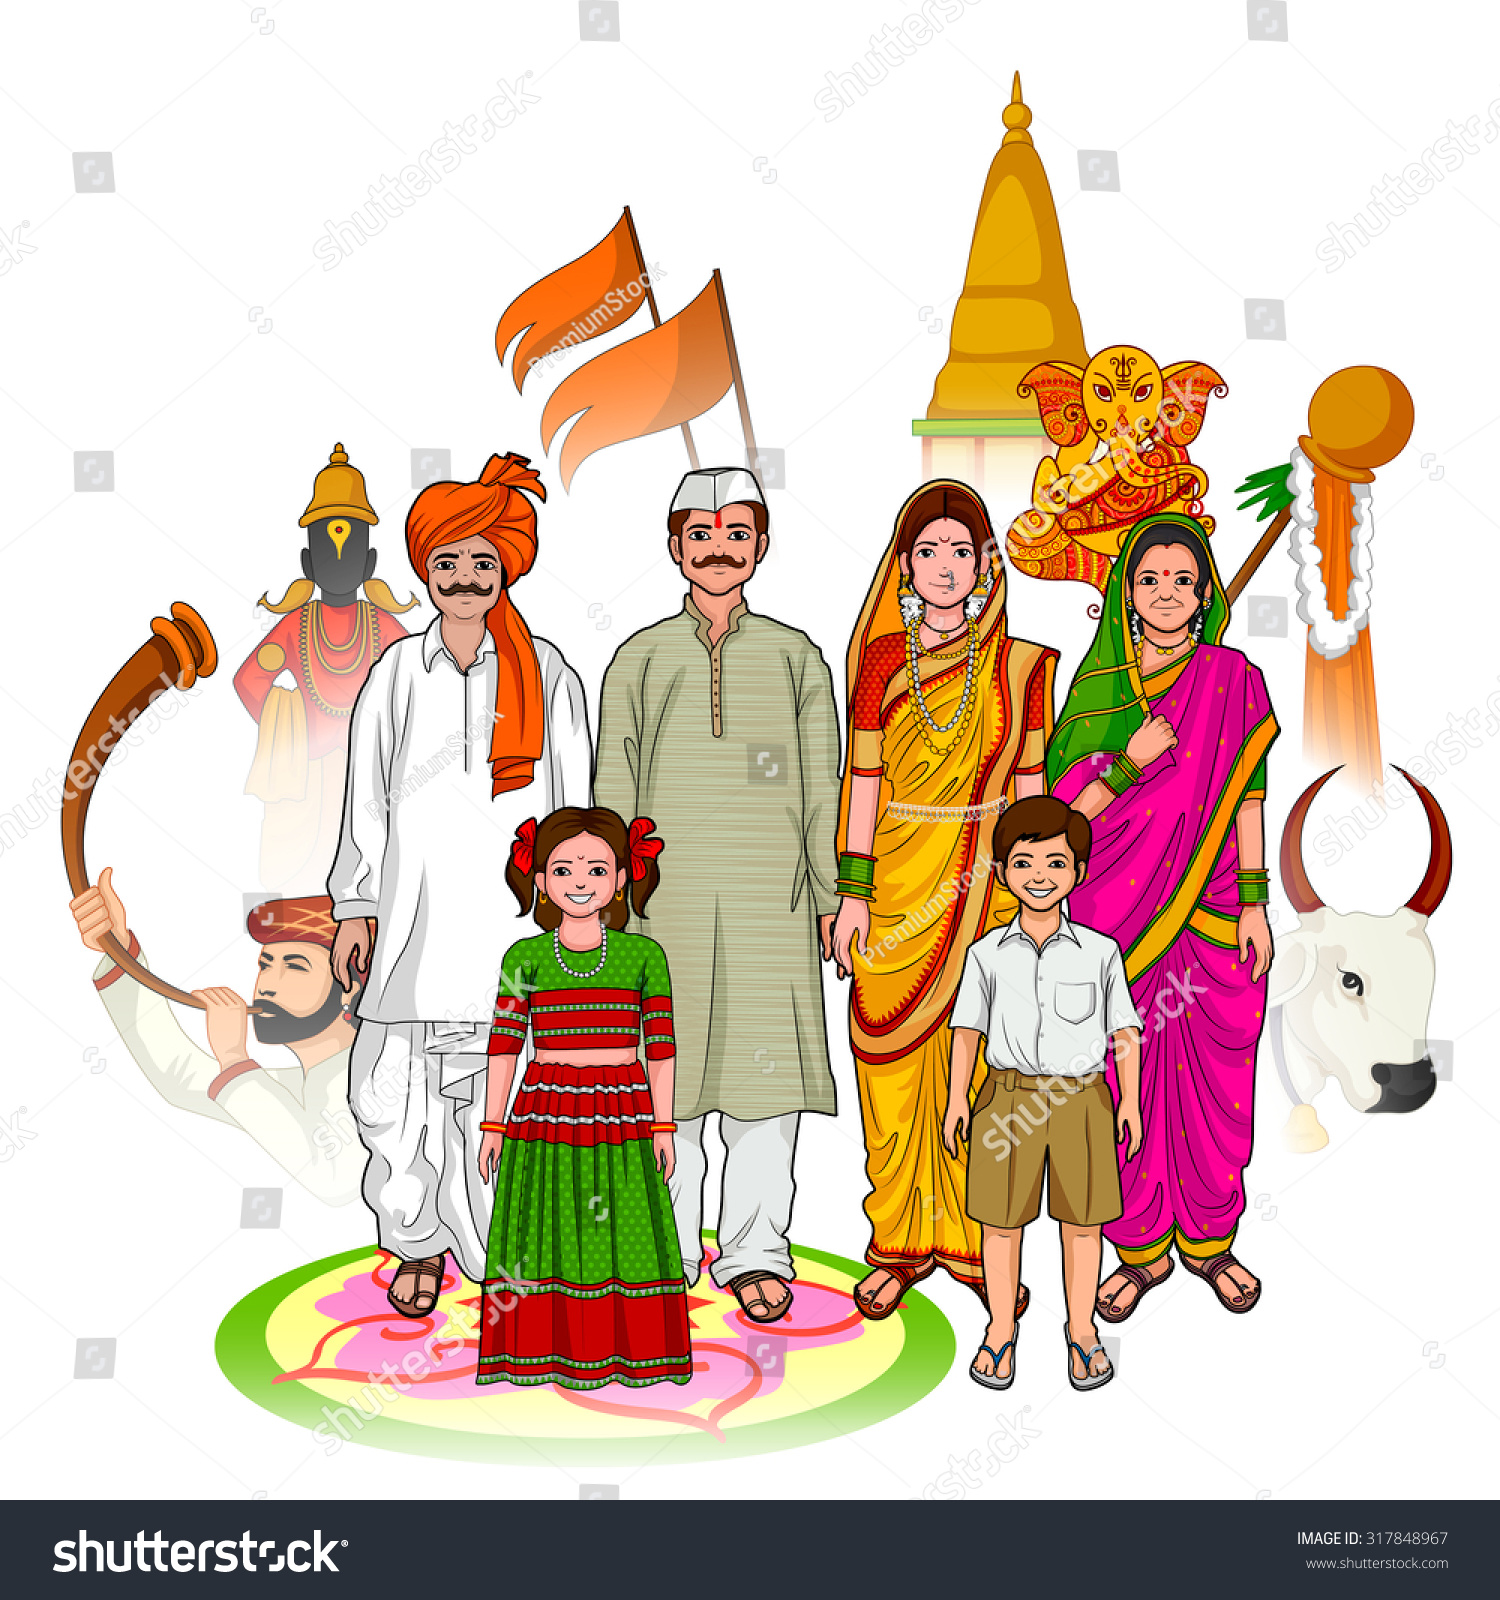 indian family clipart free download - photo #39